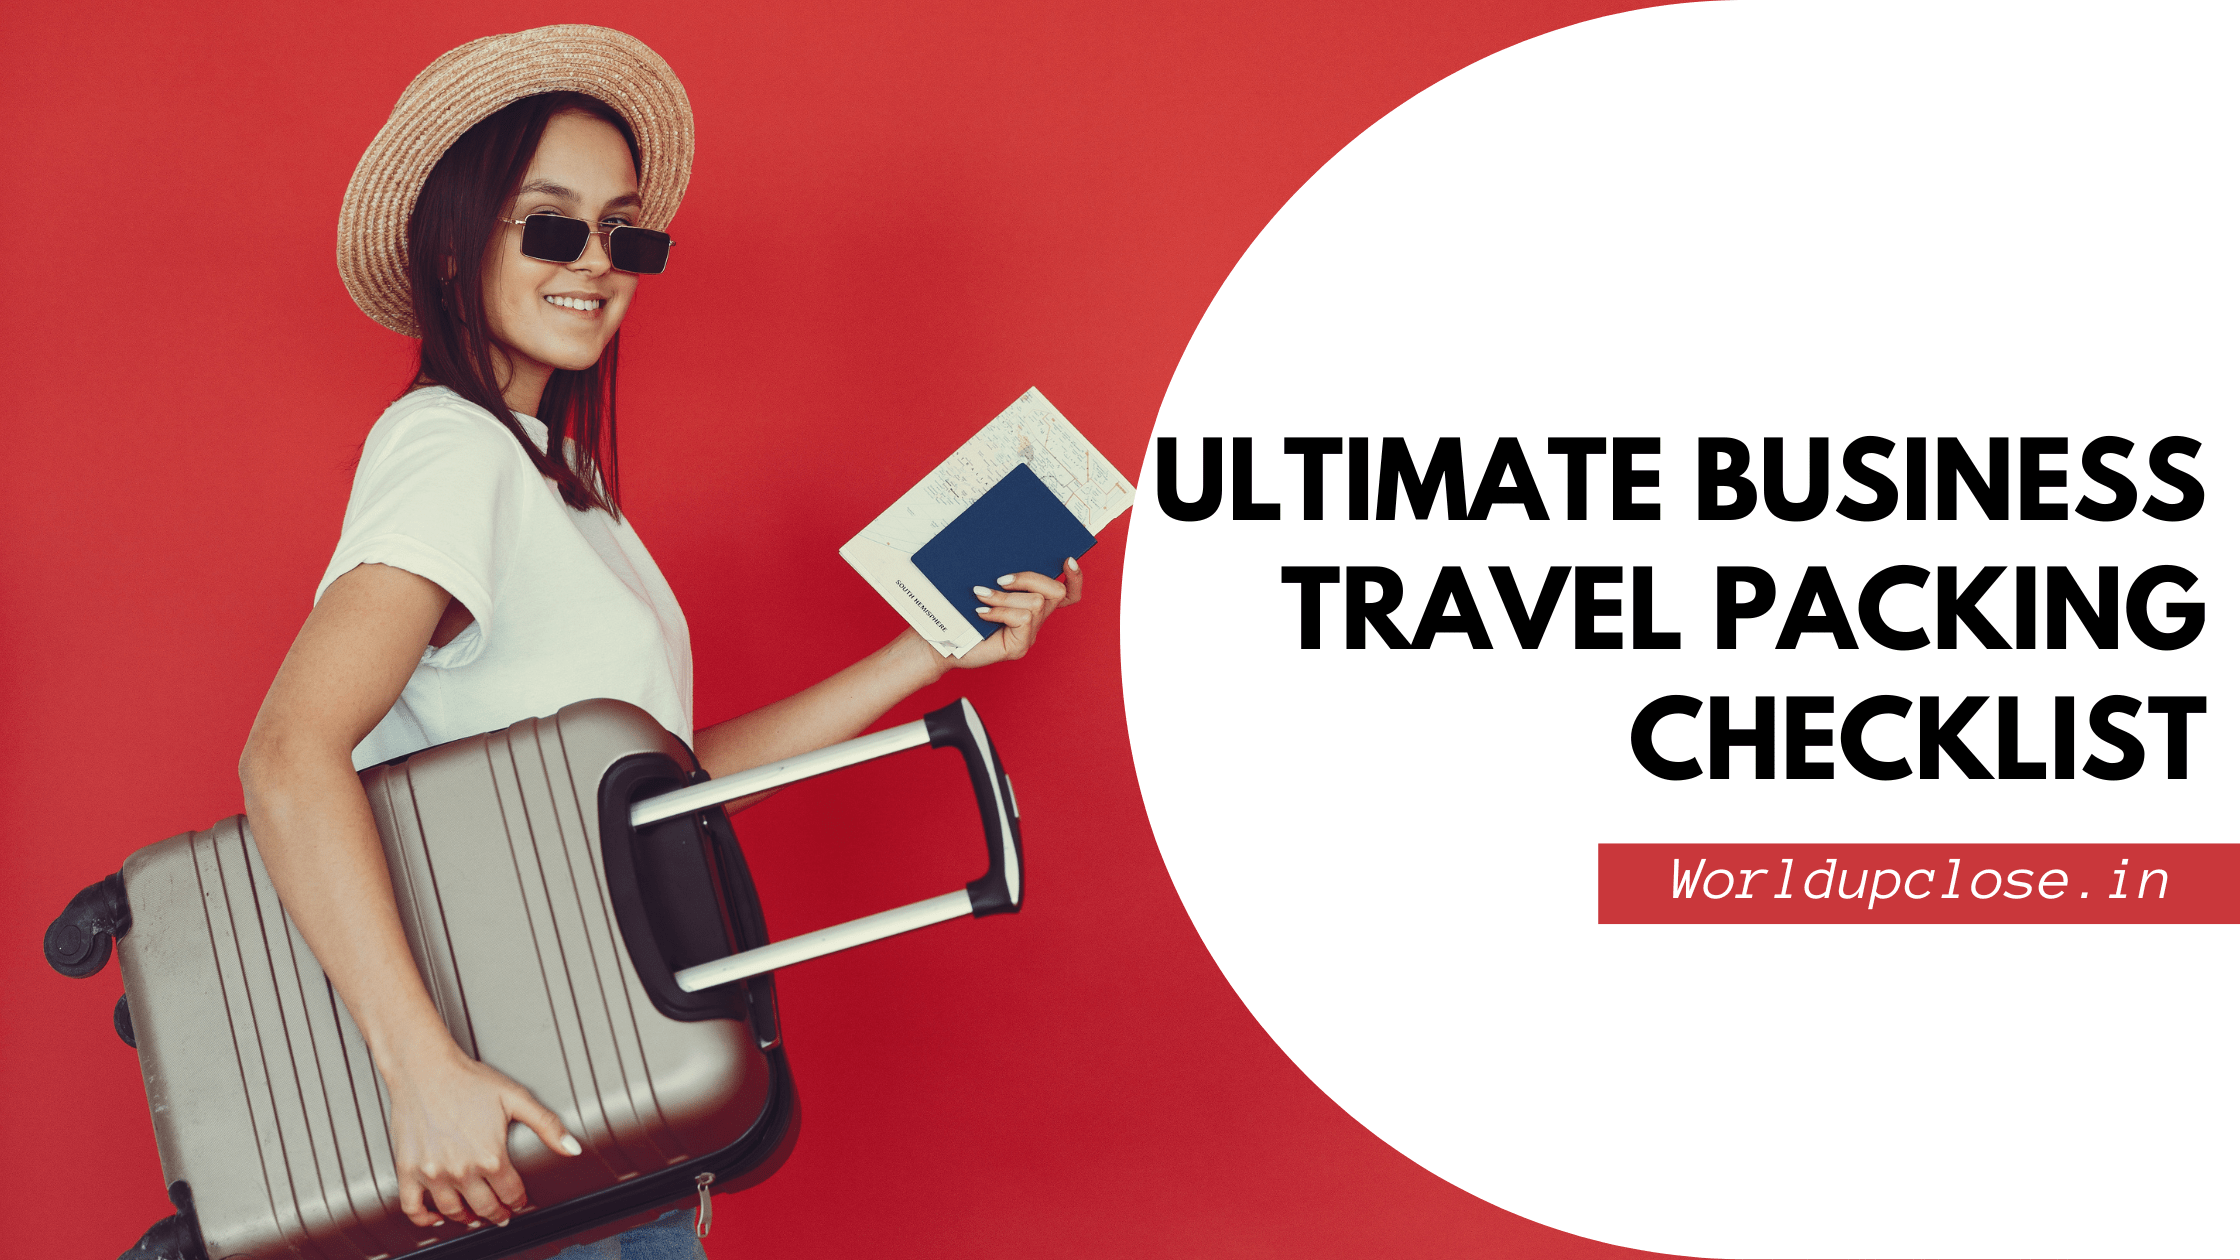 Ultimate Business Travel Packing Checklist 3